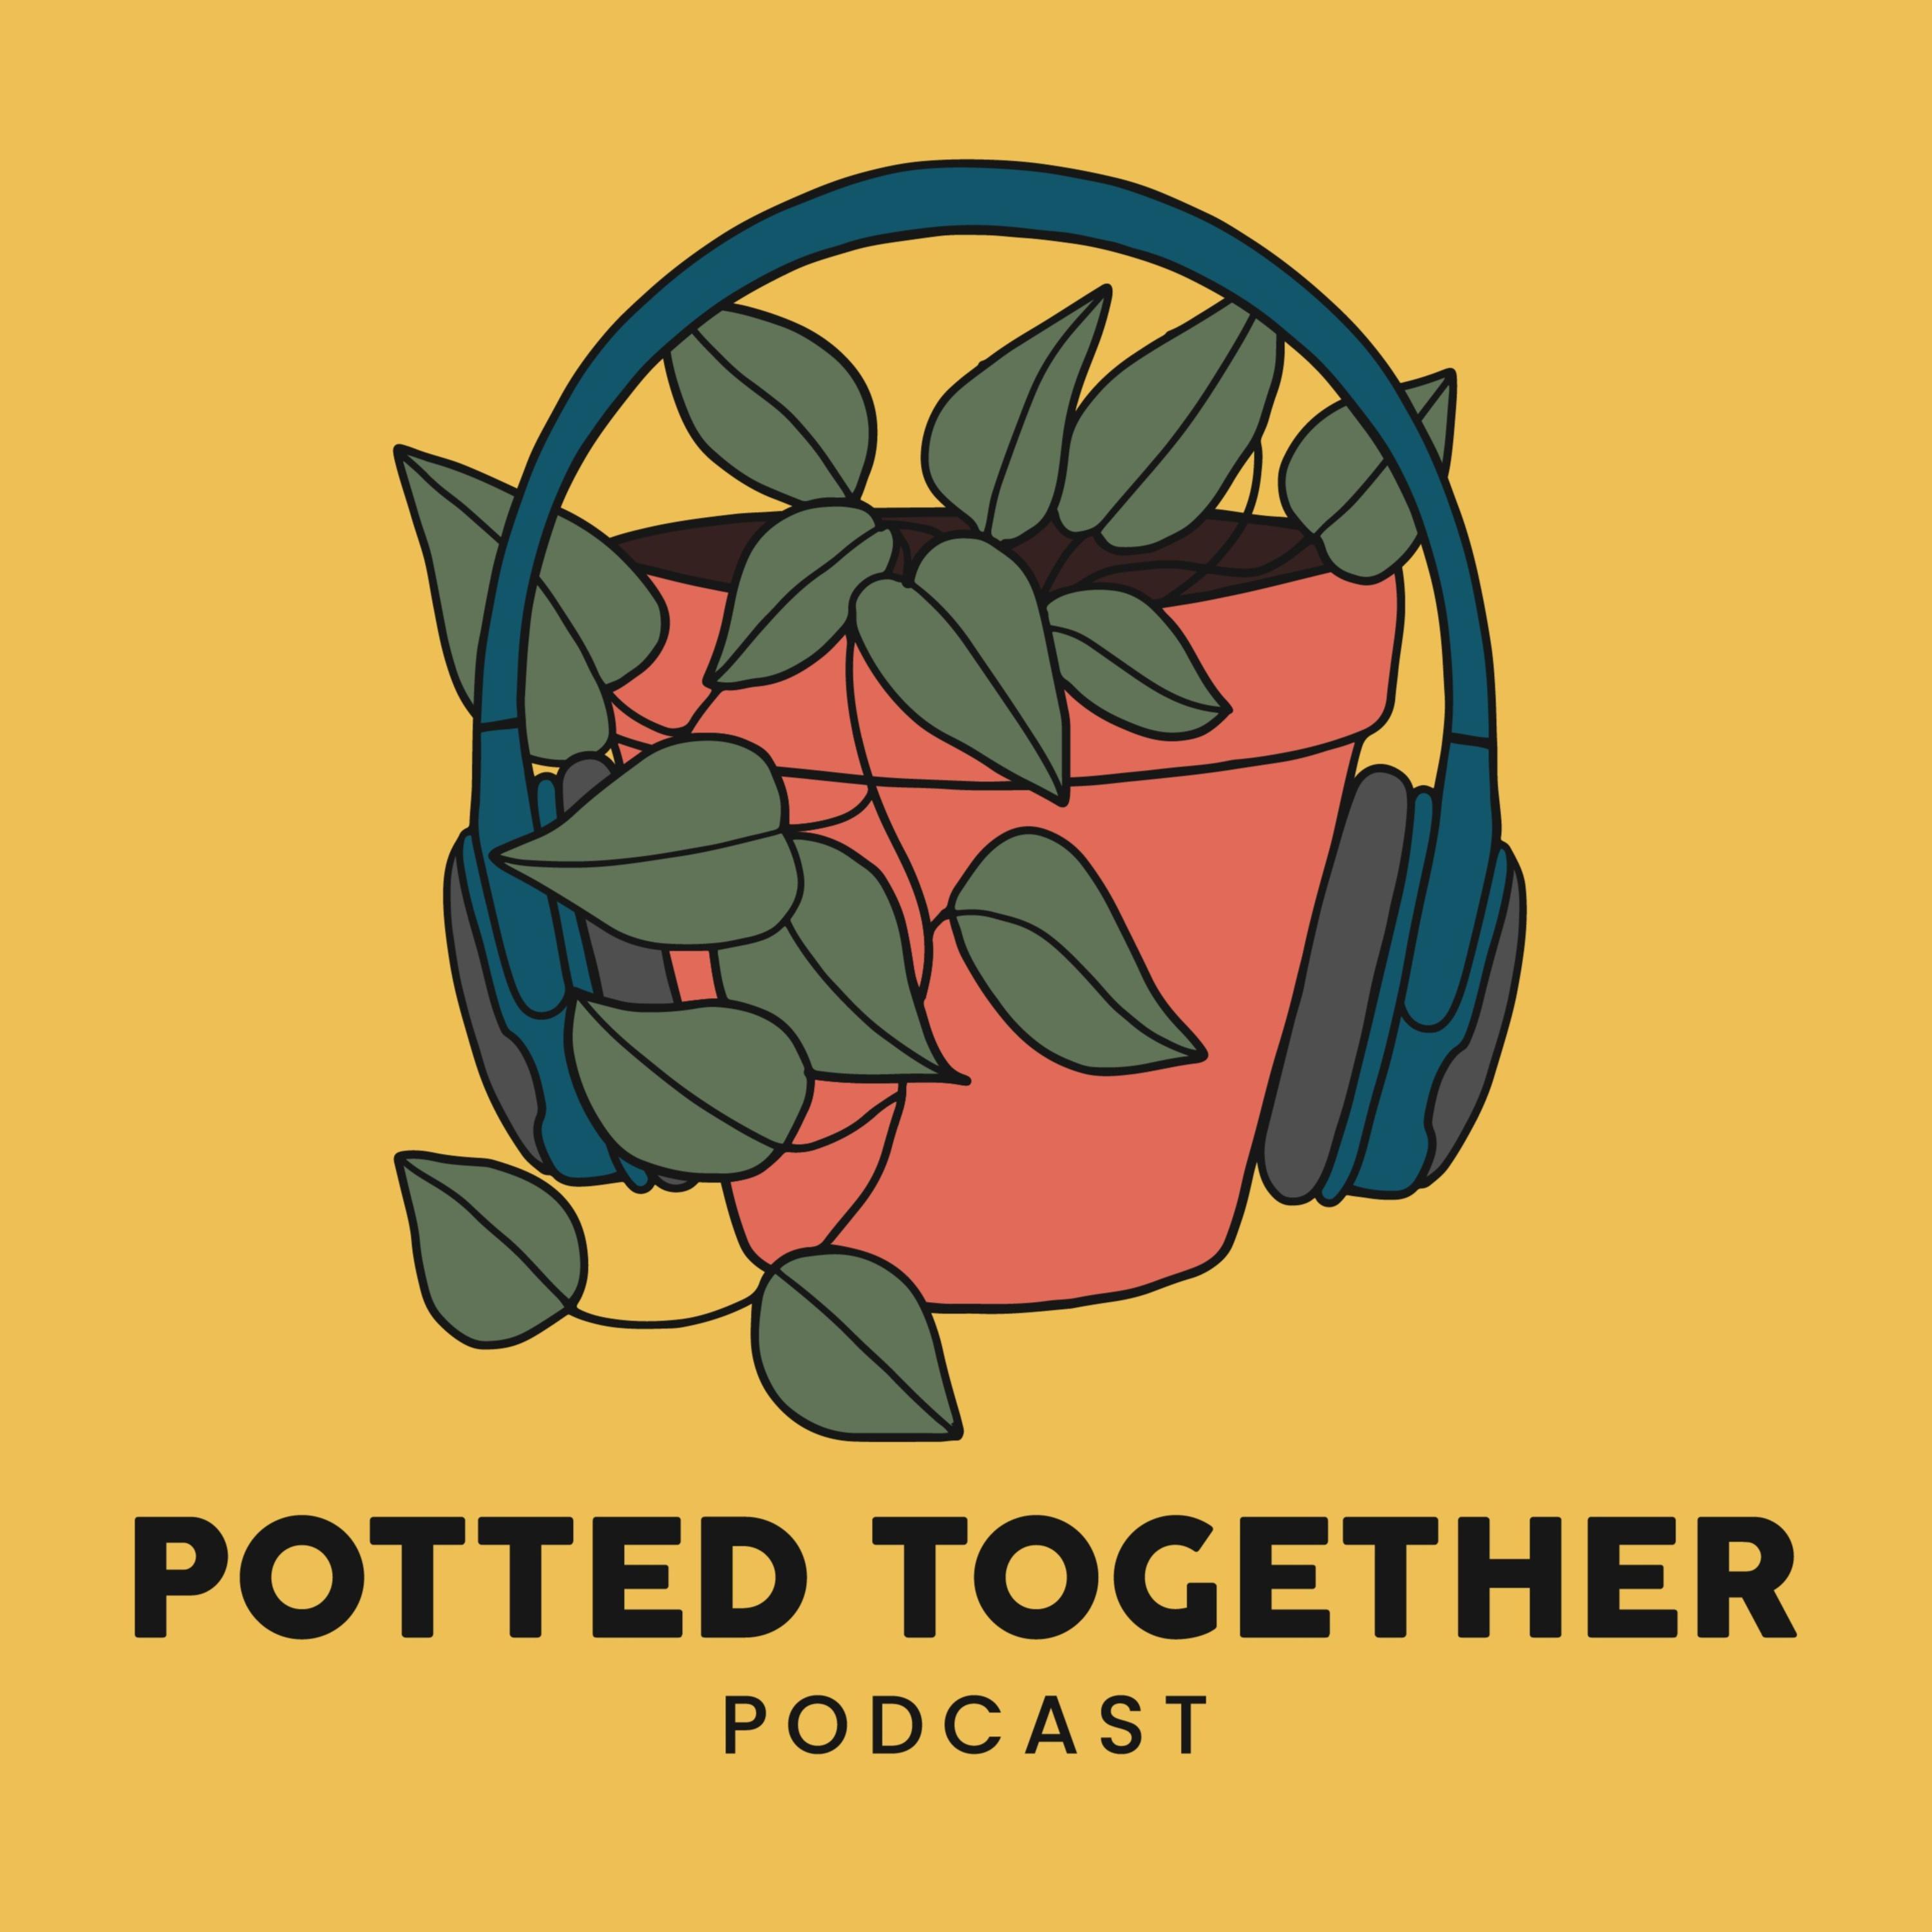 Potted Together